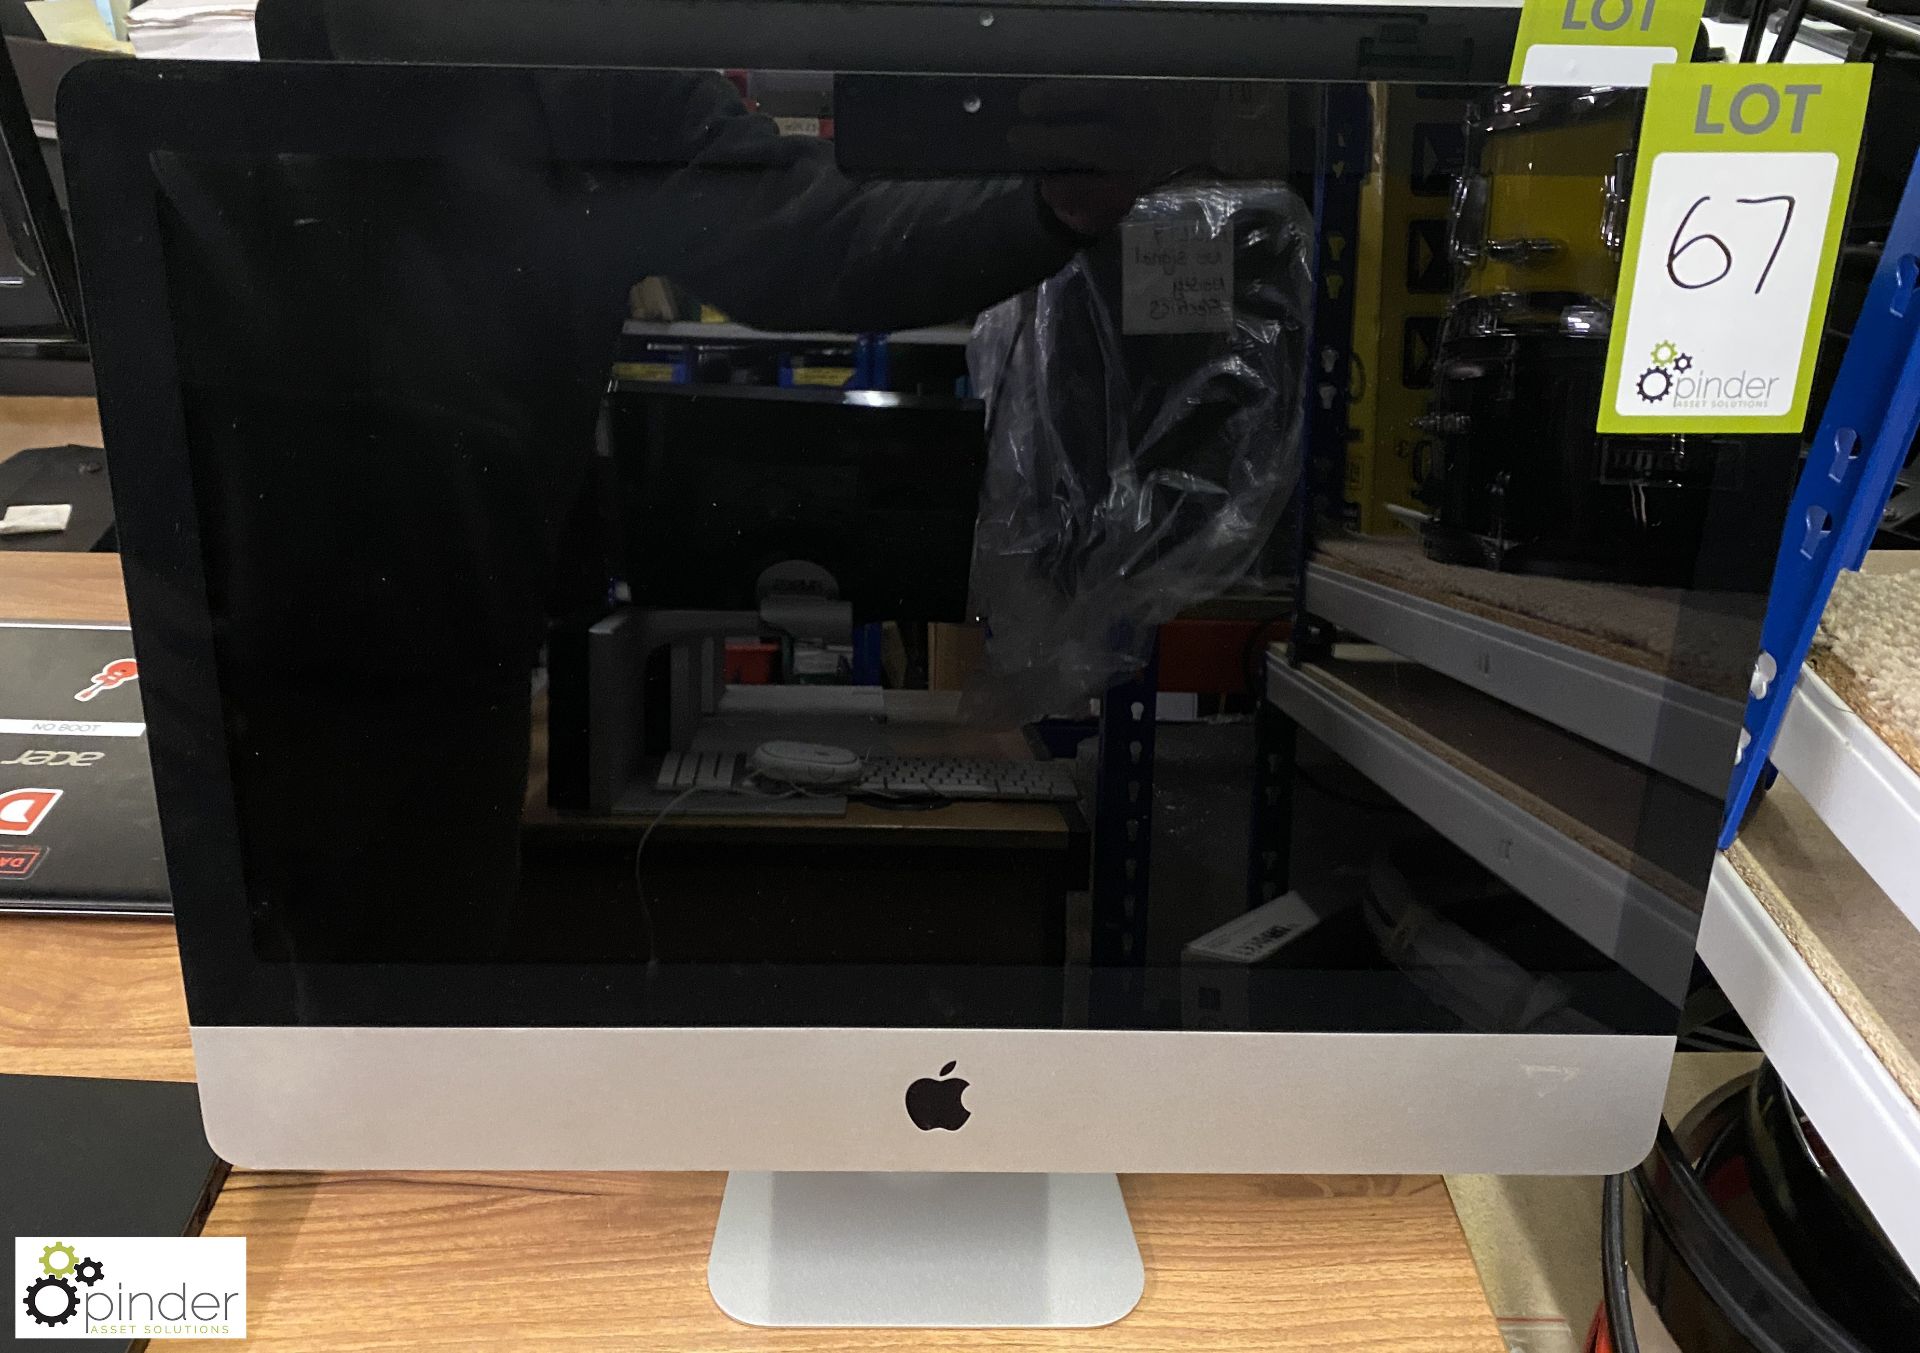 Apple iMAC A1311 Desktop PC, no keyboard, mouse, lead or passwords (no HDD)